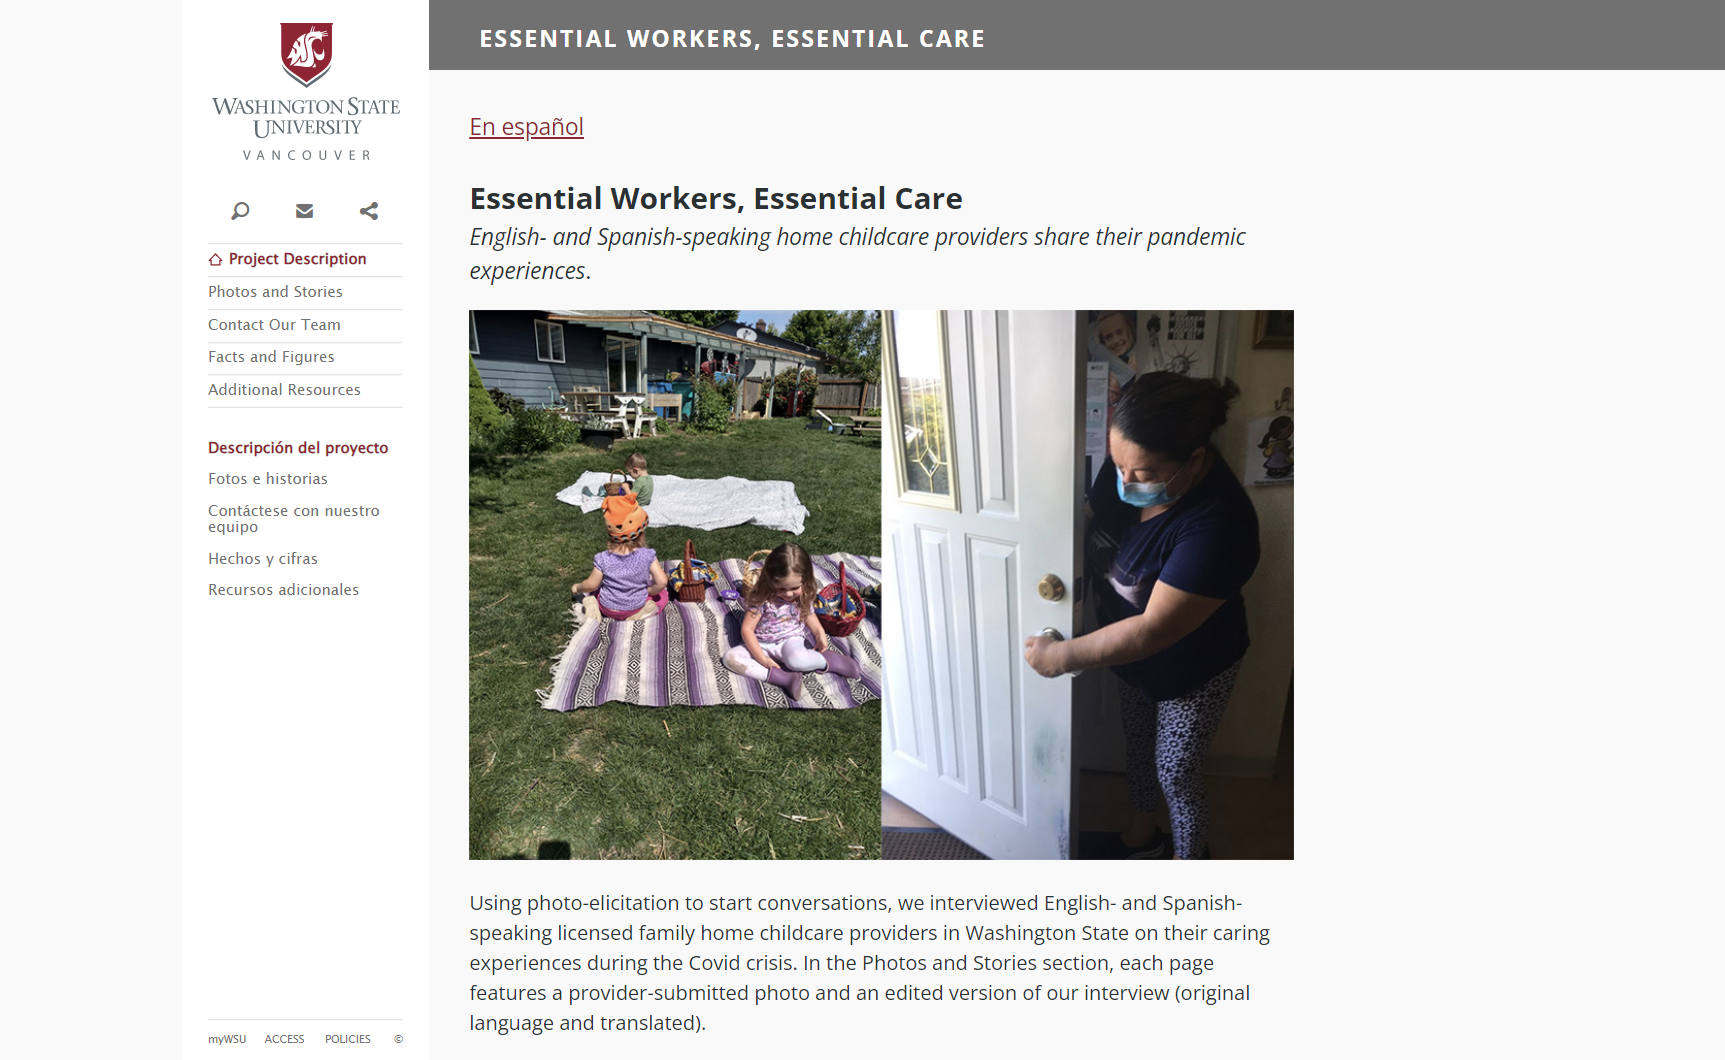 Image of a website titled Essential Workers, Essential Care